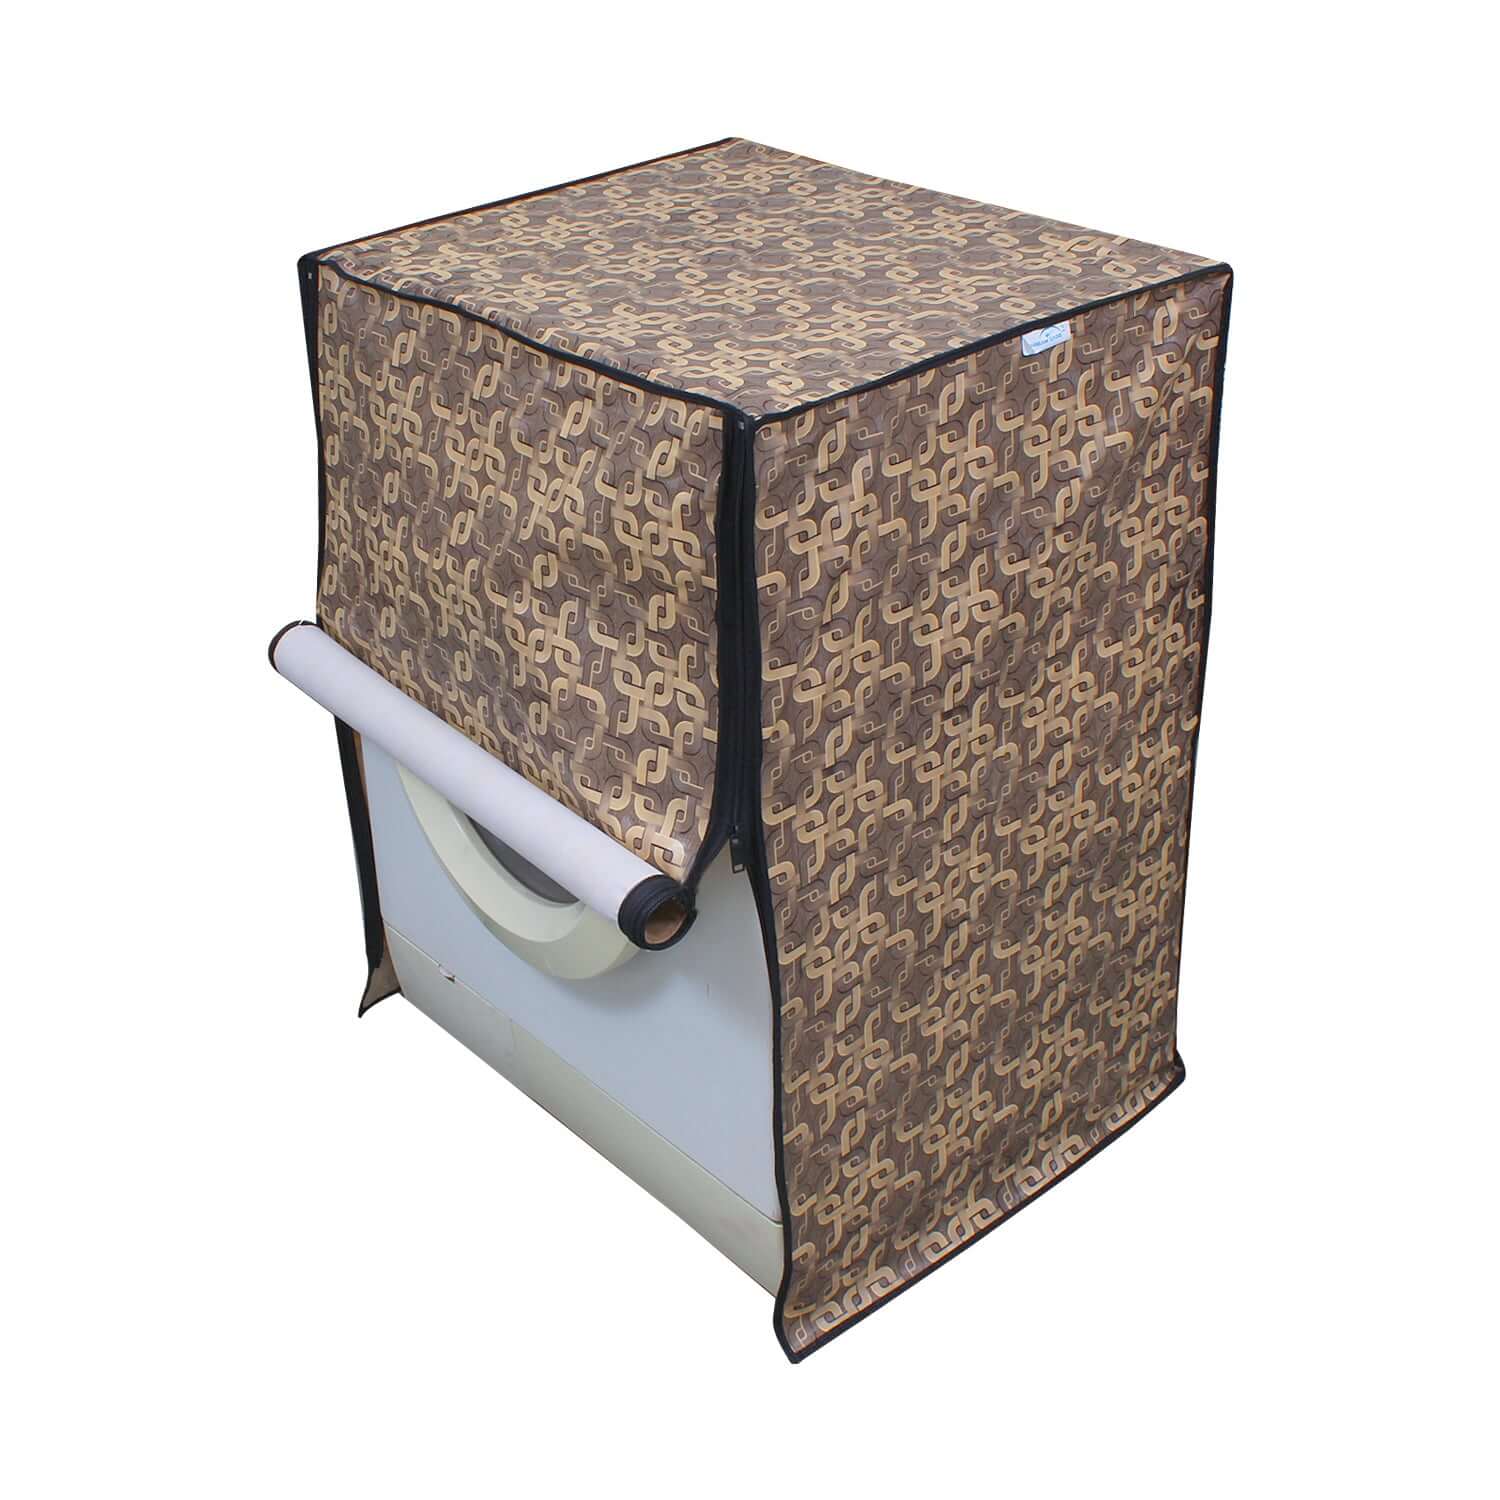 Fully Automatic Front Load Washing Machine Cover, SA40 - Dream Care Furnishings Private Limited